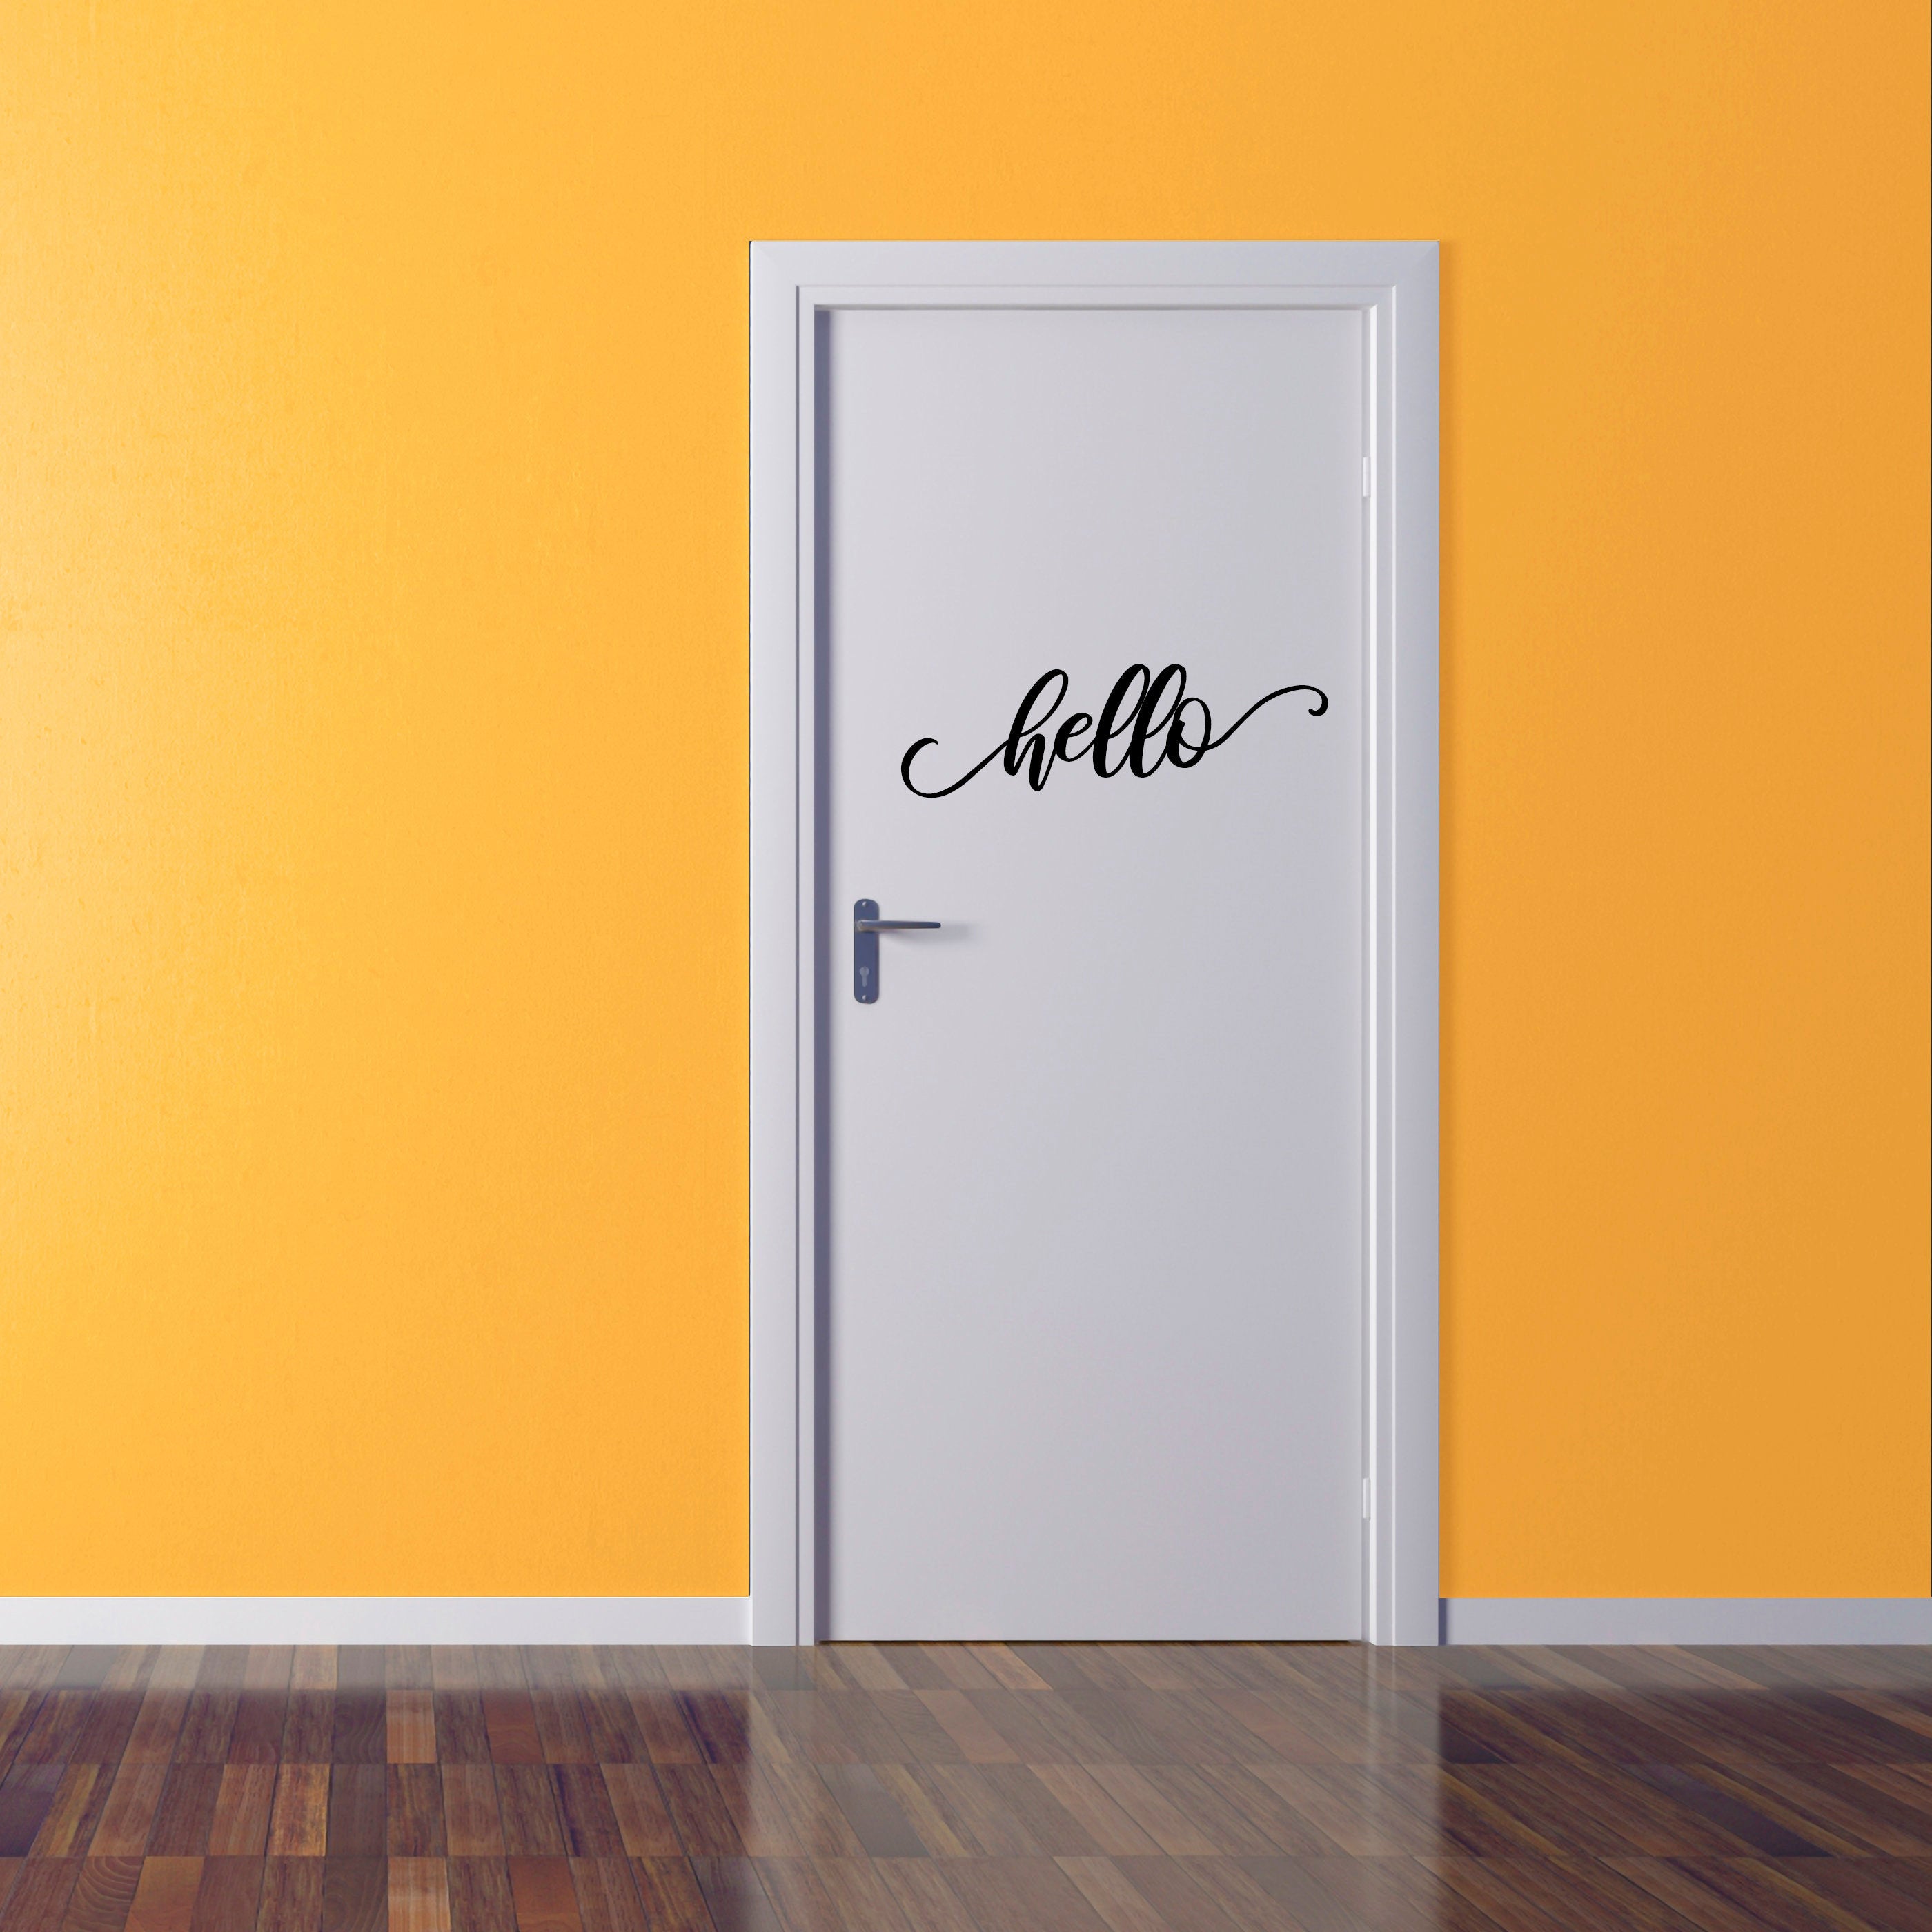 Hello Decal - Vinyl Decal Sign for Doors, Walls, House, Home, Entryway, and More!